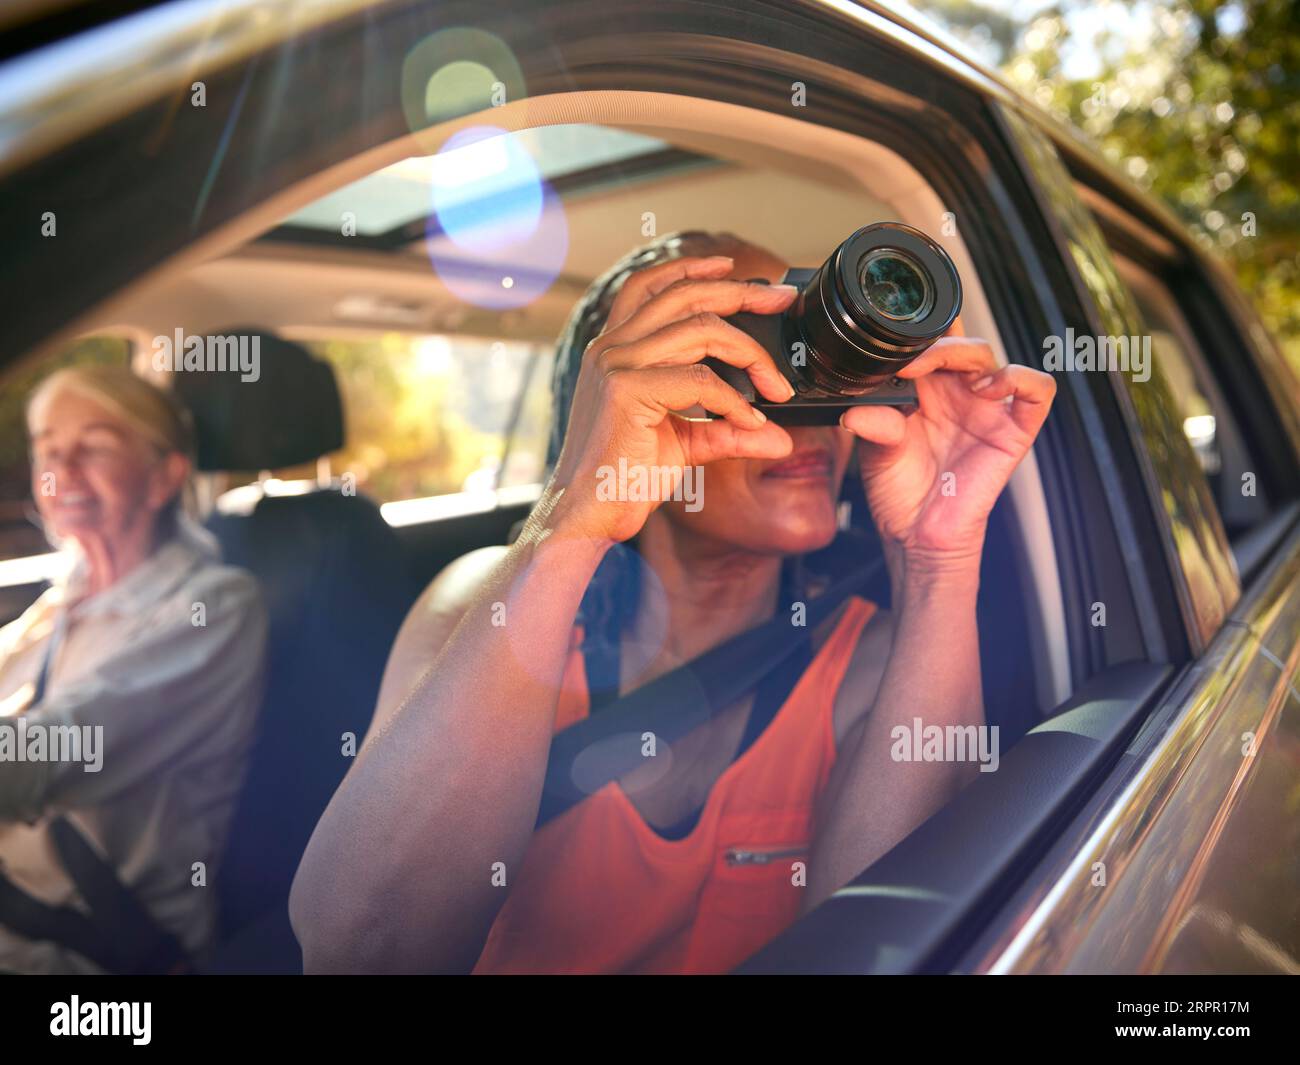 Passenger Taking Photo With Camera As Two Senior Female Friends Enjoy Day Trip Out In Car Stock Photo